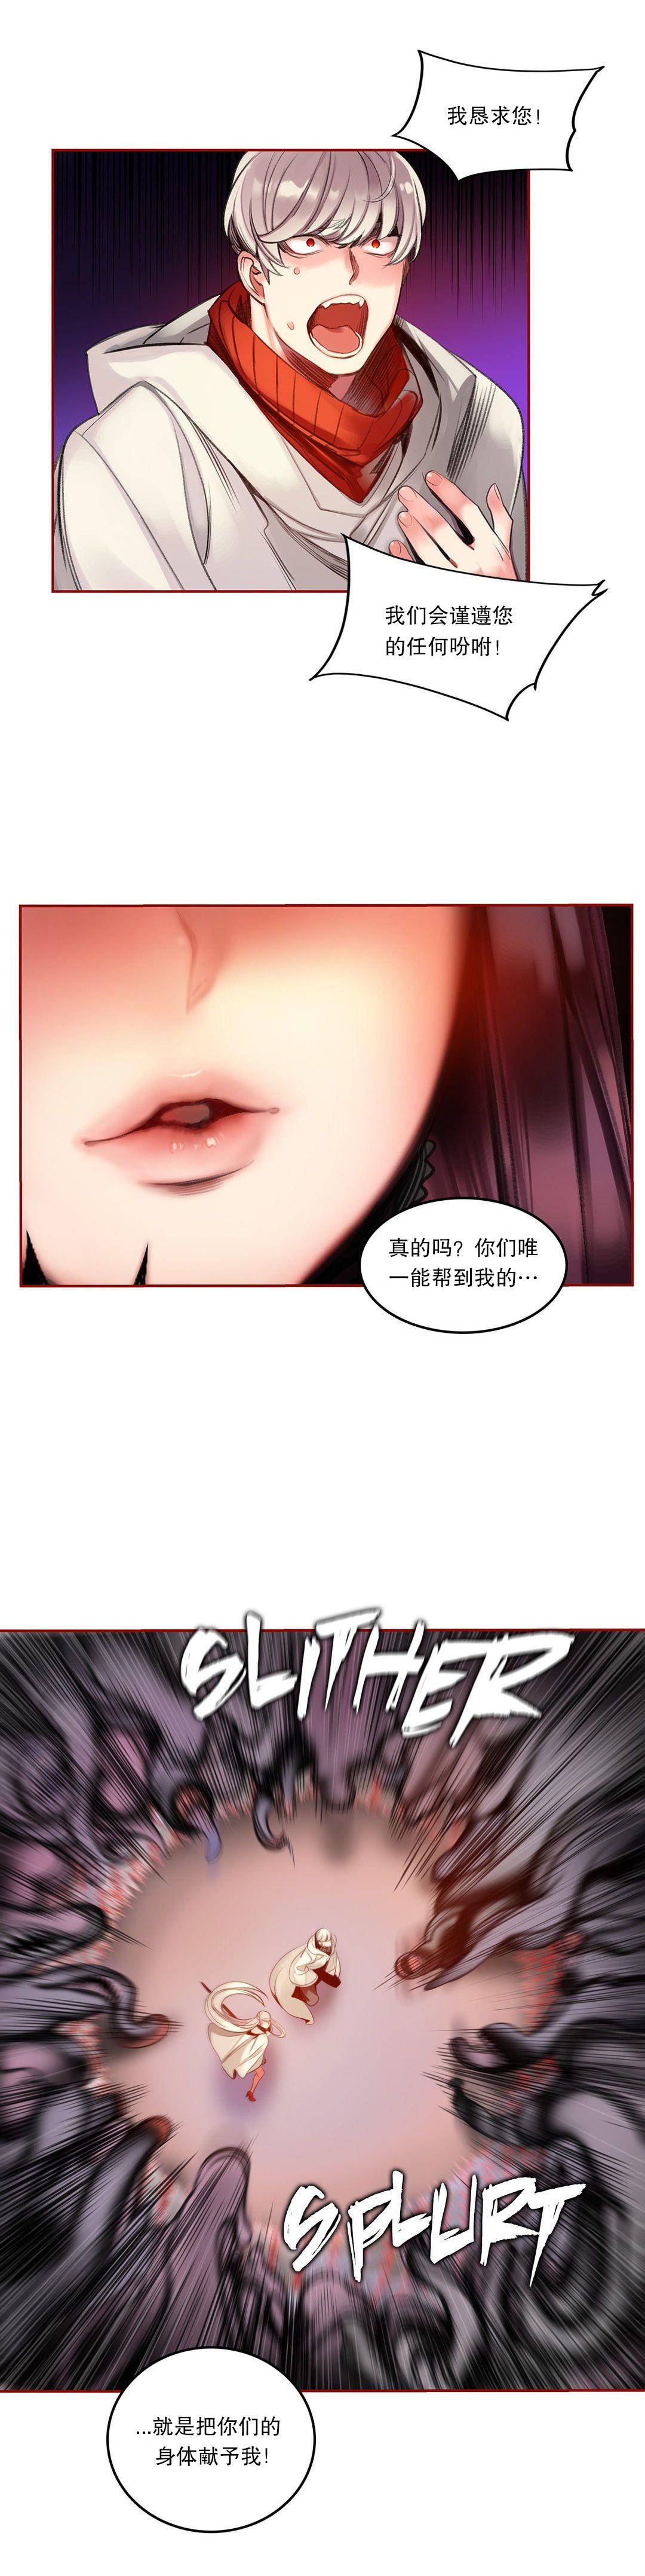 [Juder] Lilith`s Cord (第二季) Ch.61-65 [Chinese] [aaatwist个人汉化] [Ongoing] 86